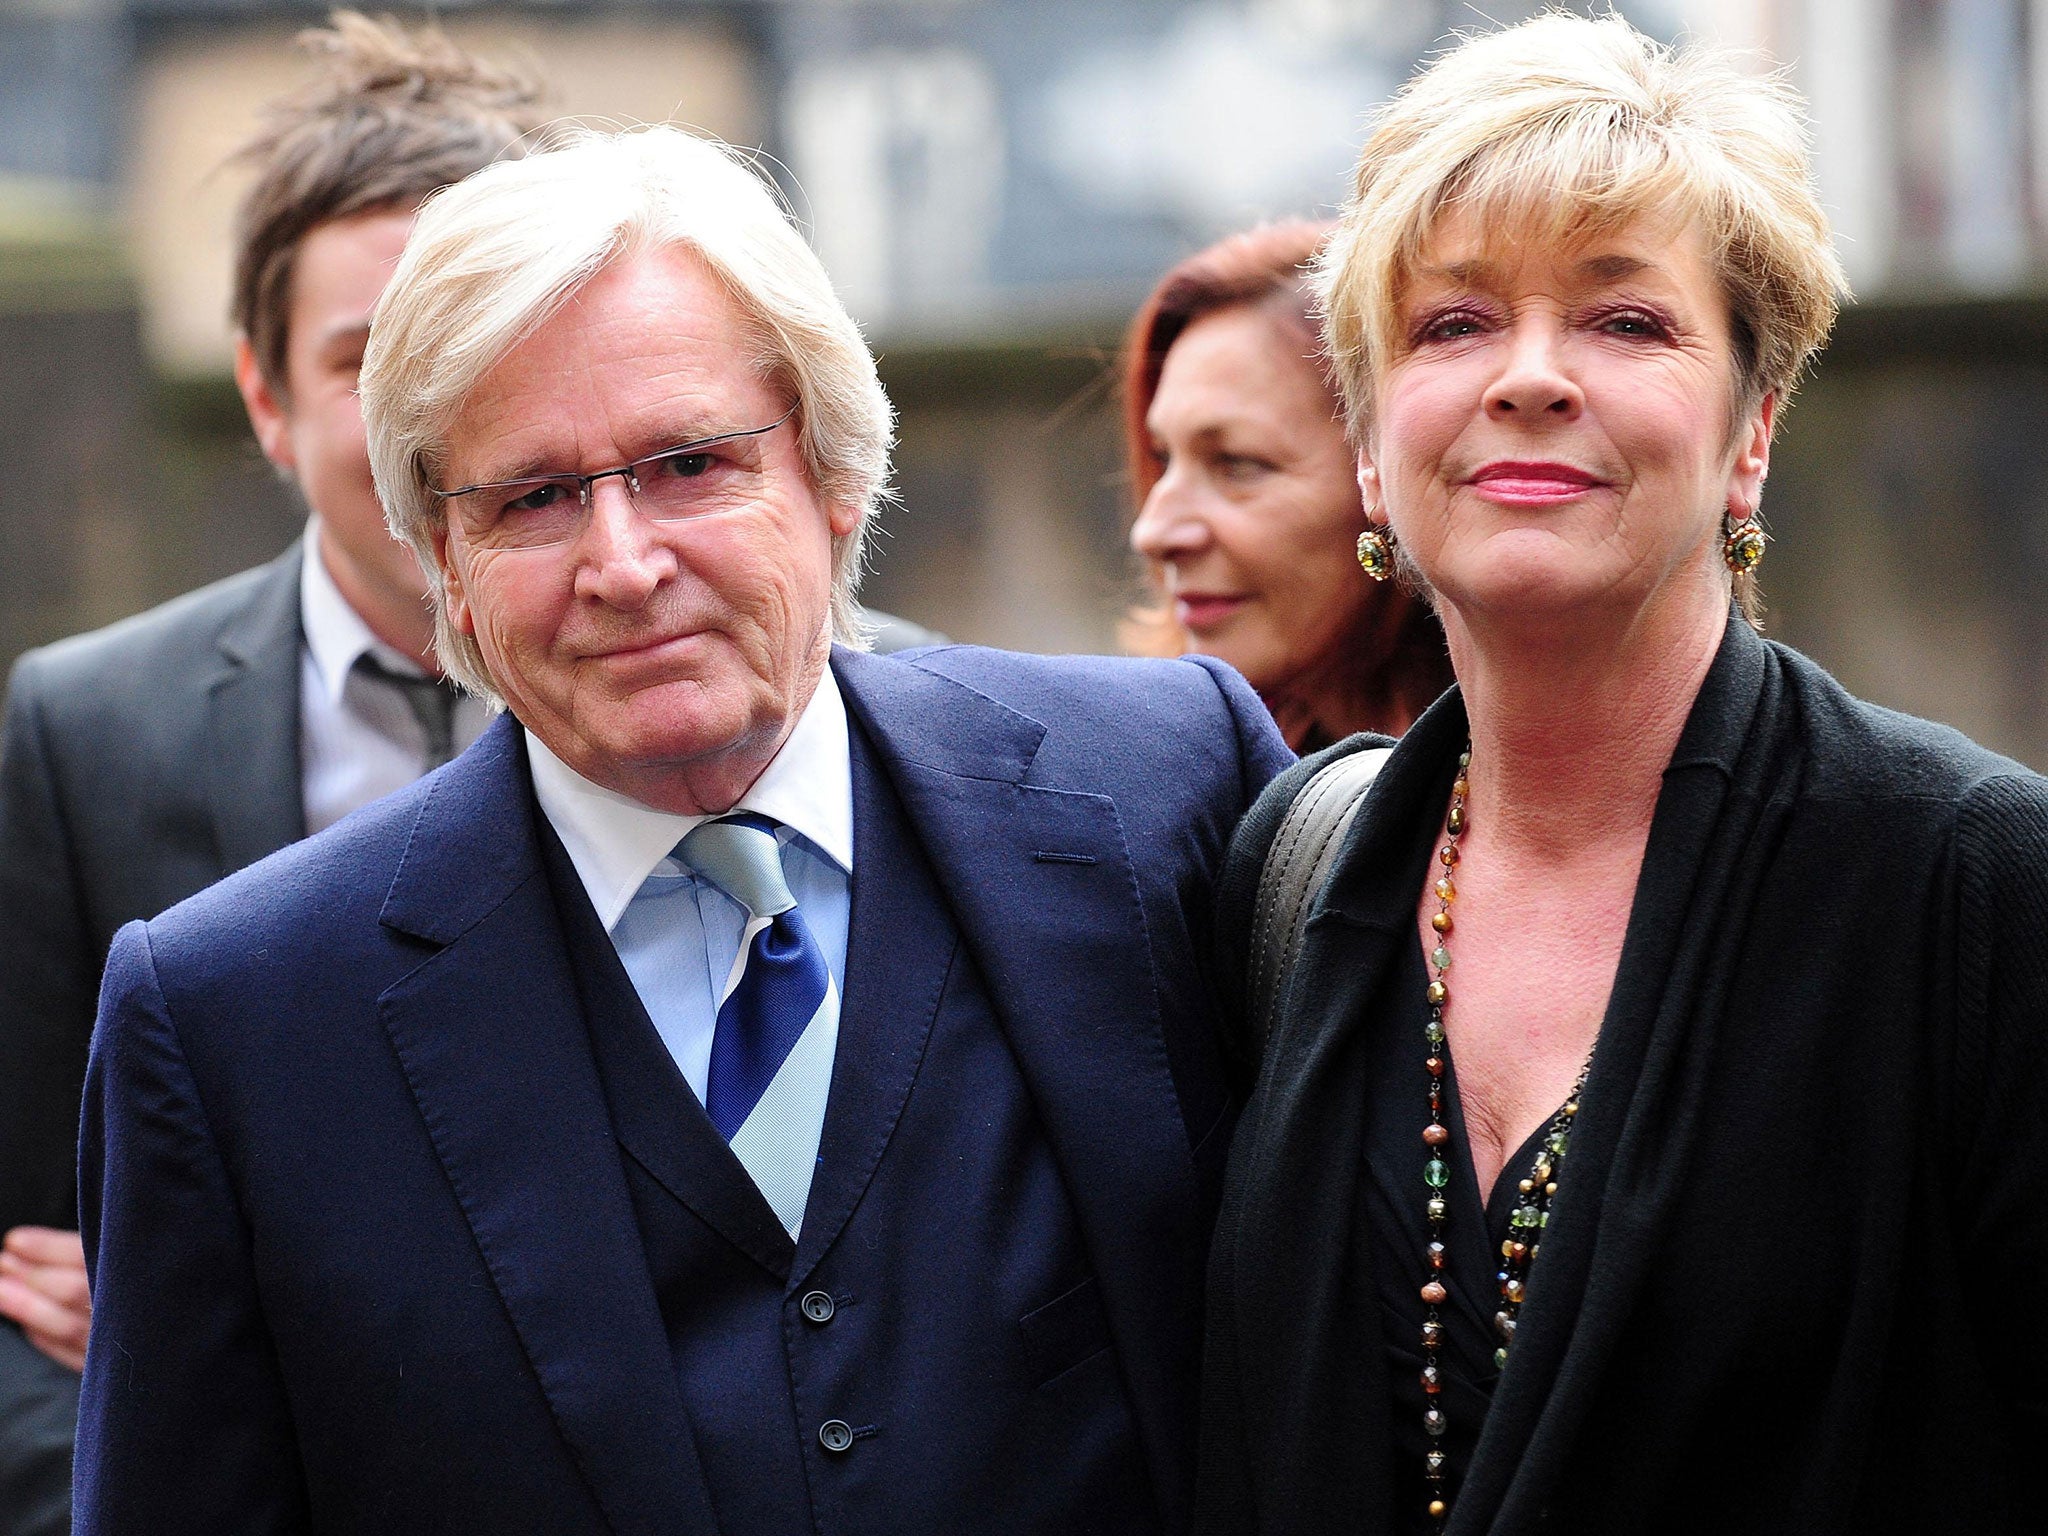 Coronation Street actors William Roache, who played Ken Barlow with Anne Kirkbride, who played Deirdre Barlow, on 25 February 2010